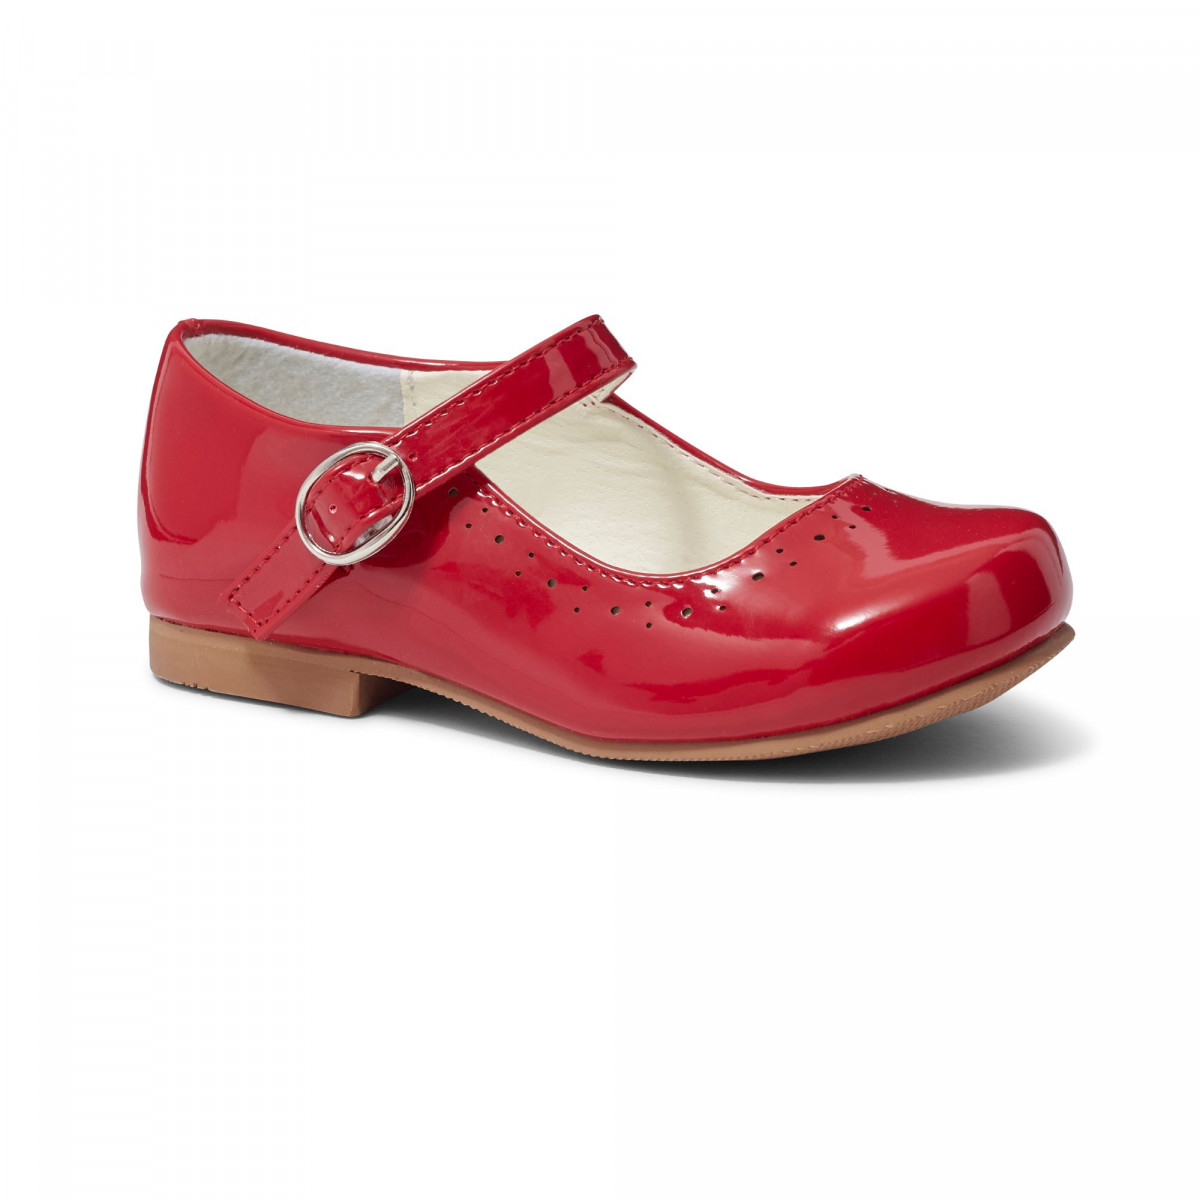 childrens mary jane shoes